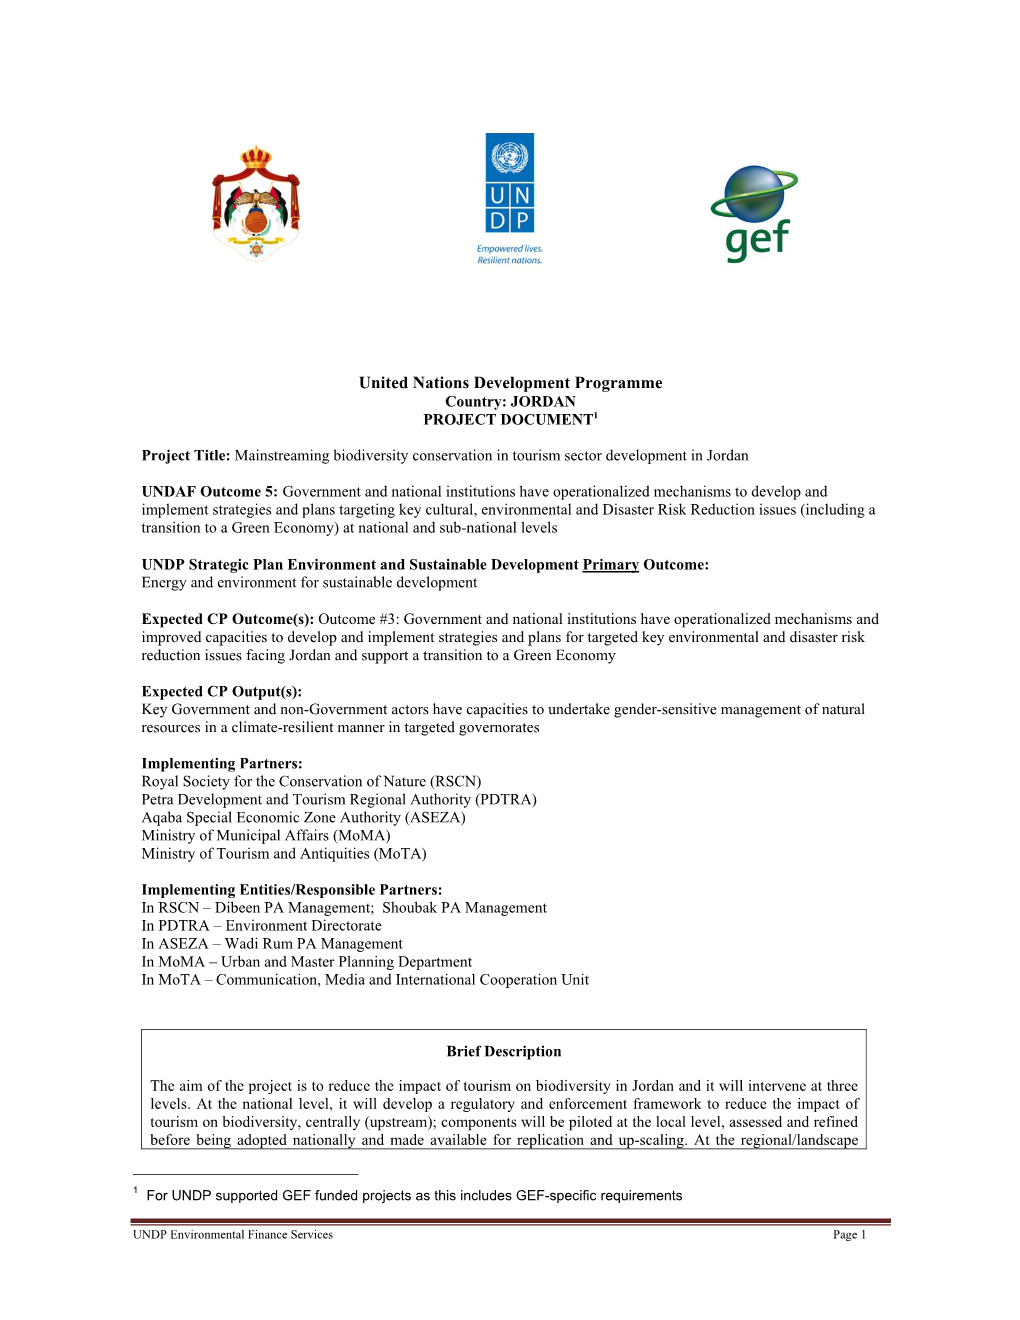 United Nations Development Programme Country: JORDAN PROJECT DOCUMENT1